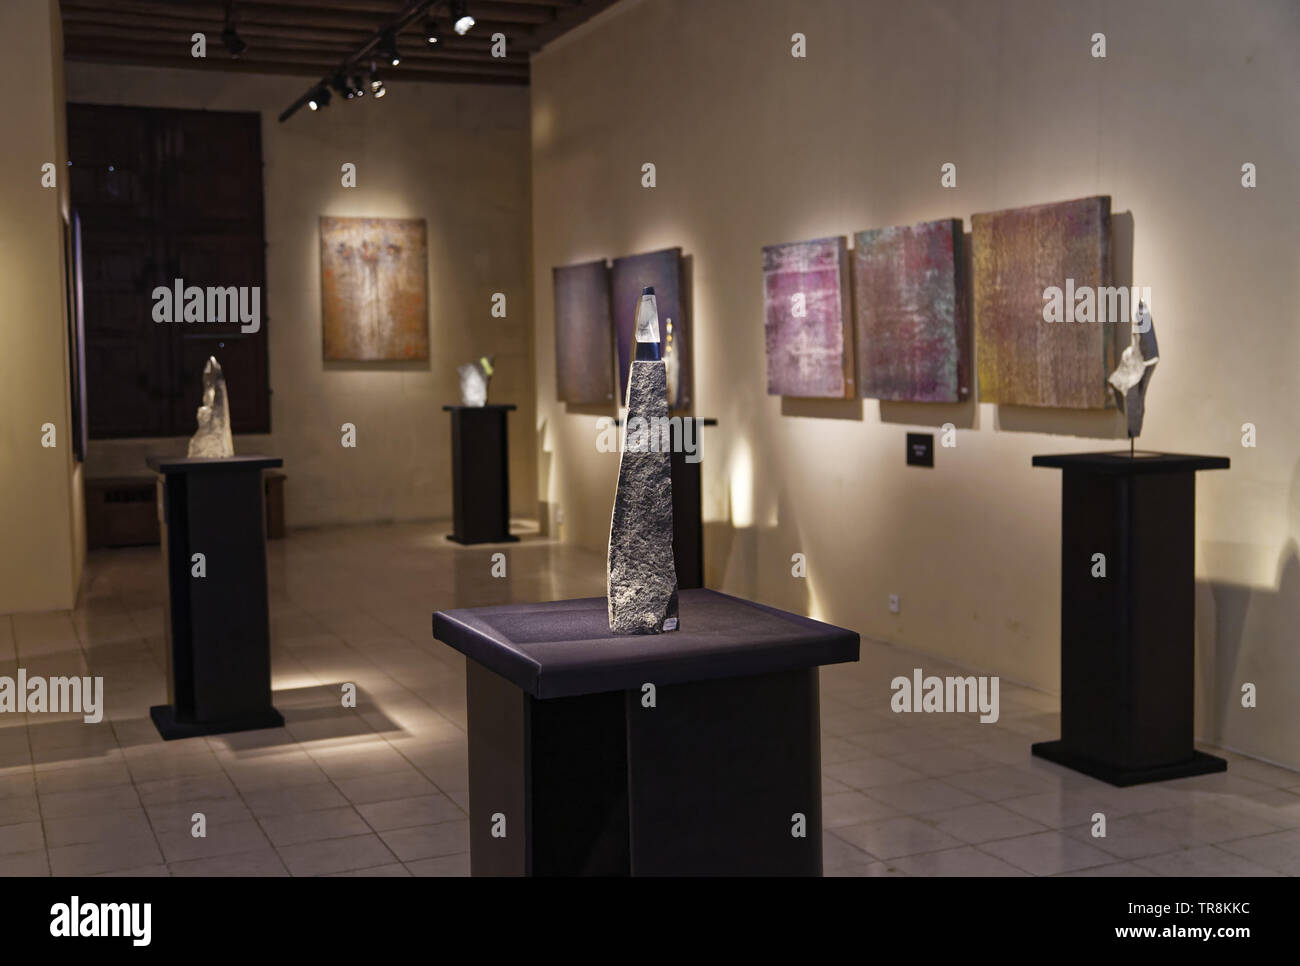 Tours, France.24th May,2019.Artworks of Fournier & Kolb at Exhibition Re-naissance(s) of the Capazza Gallery. ©:Veronique Phitoussi/Alamy Stock Photo Stock Photo